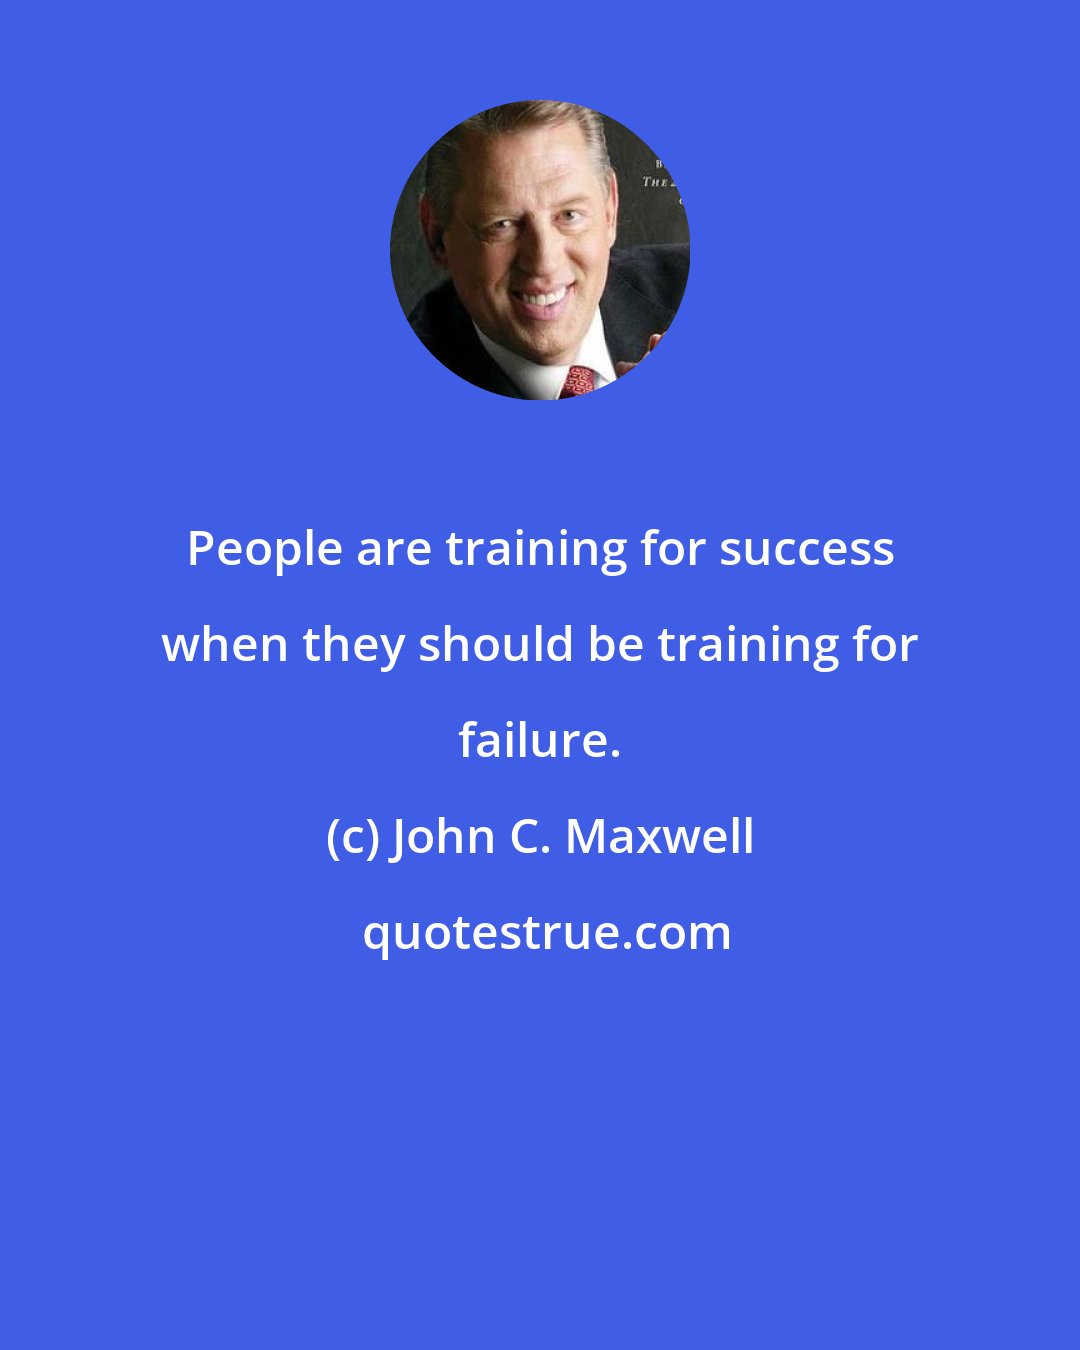 John C. Maxwell: People are training for success when they should be training for failure.